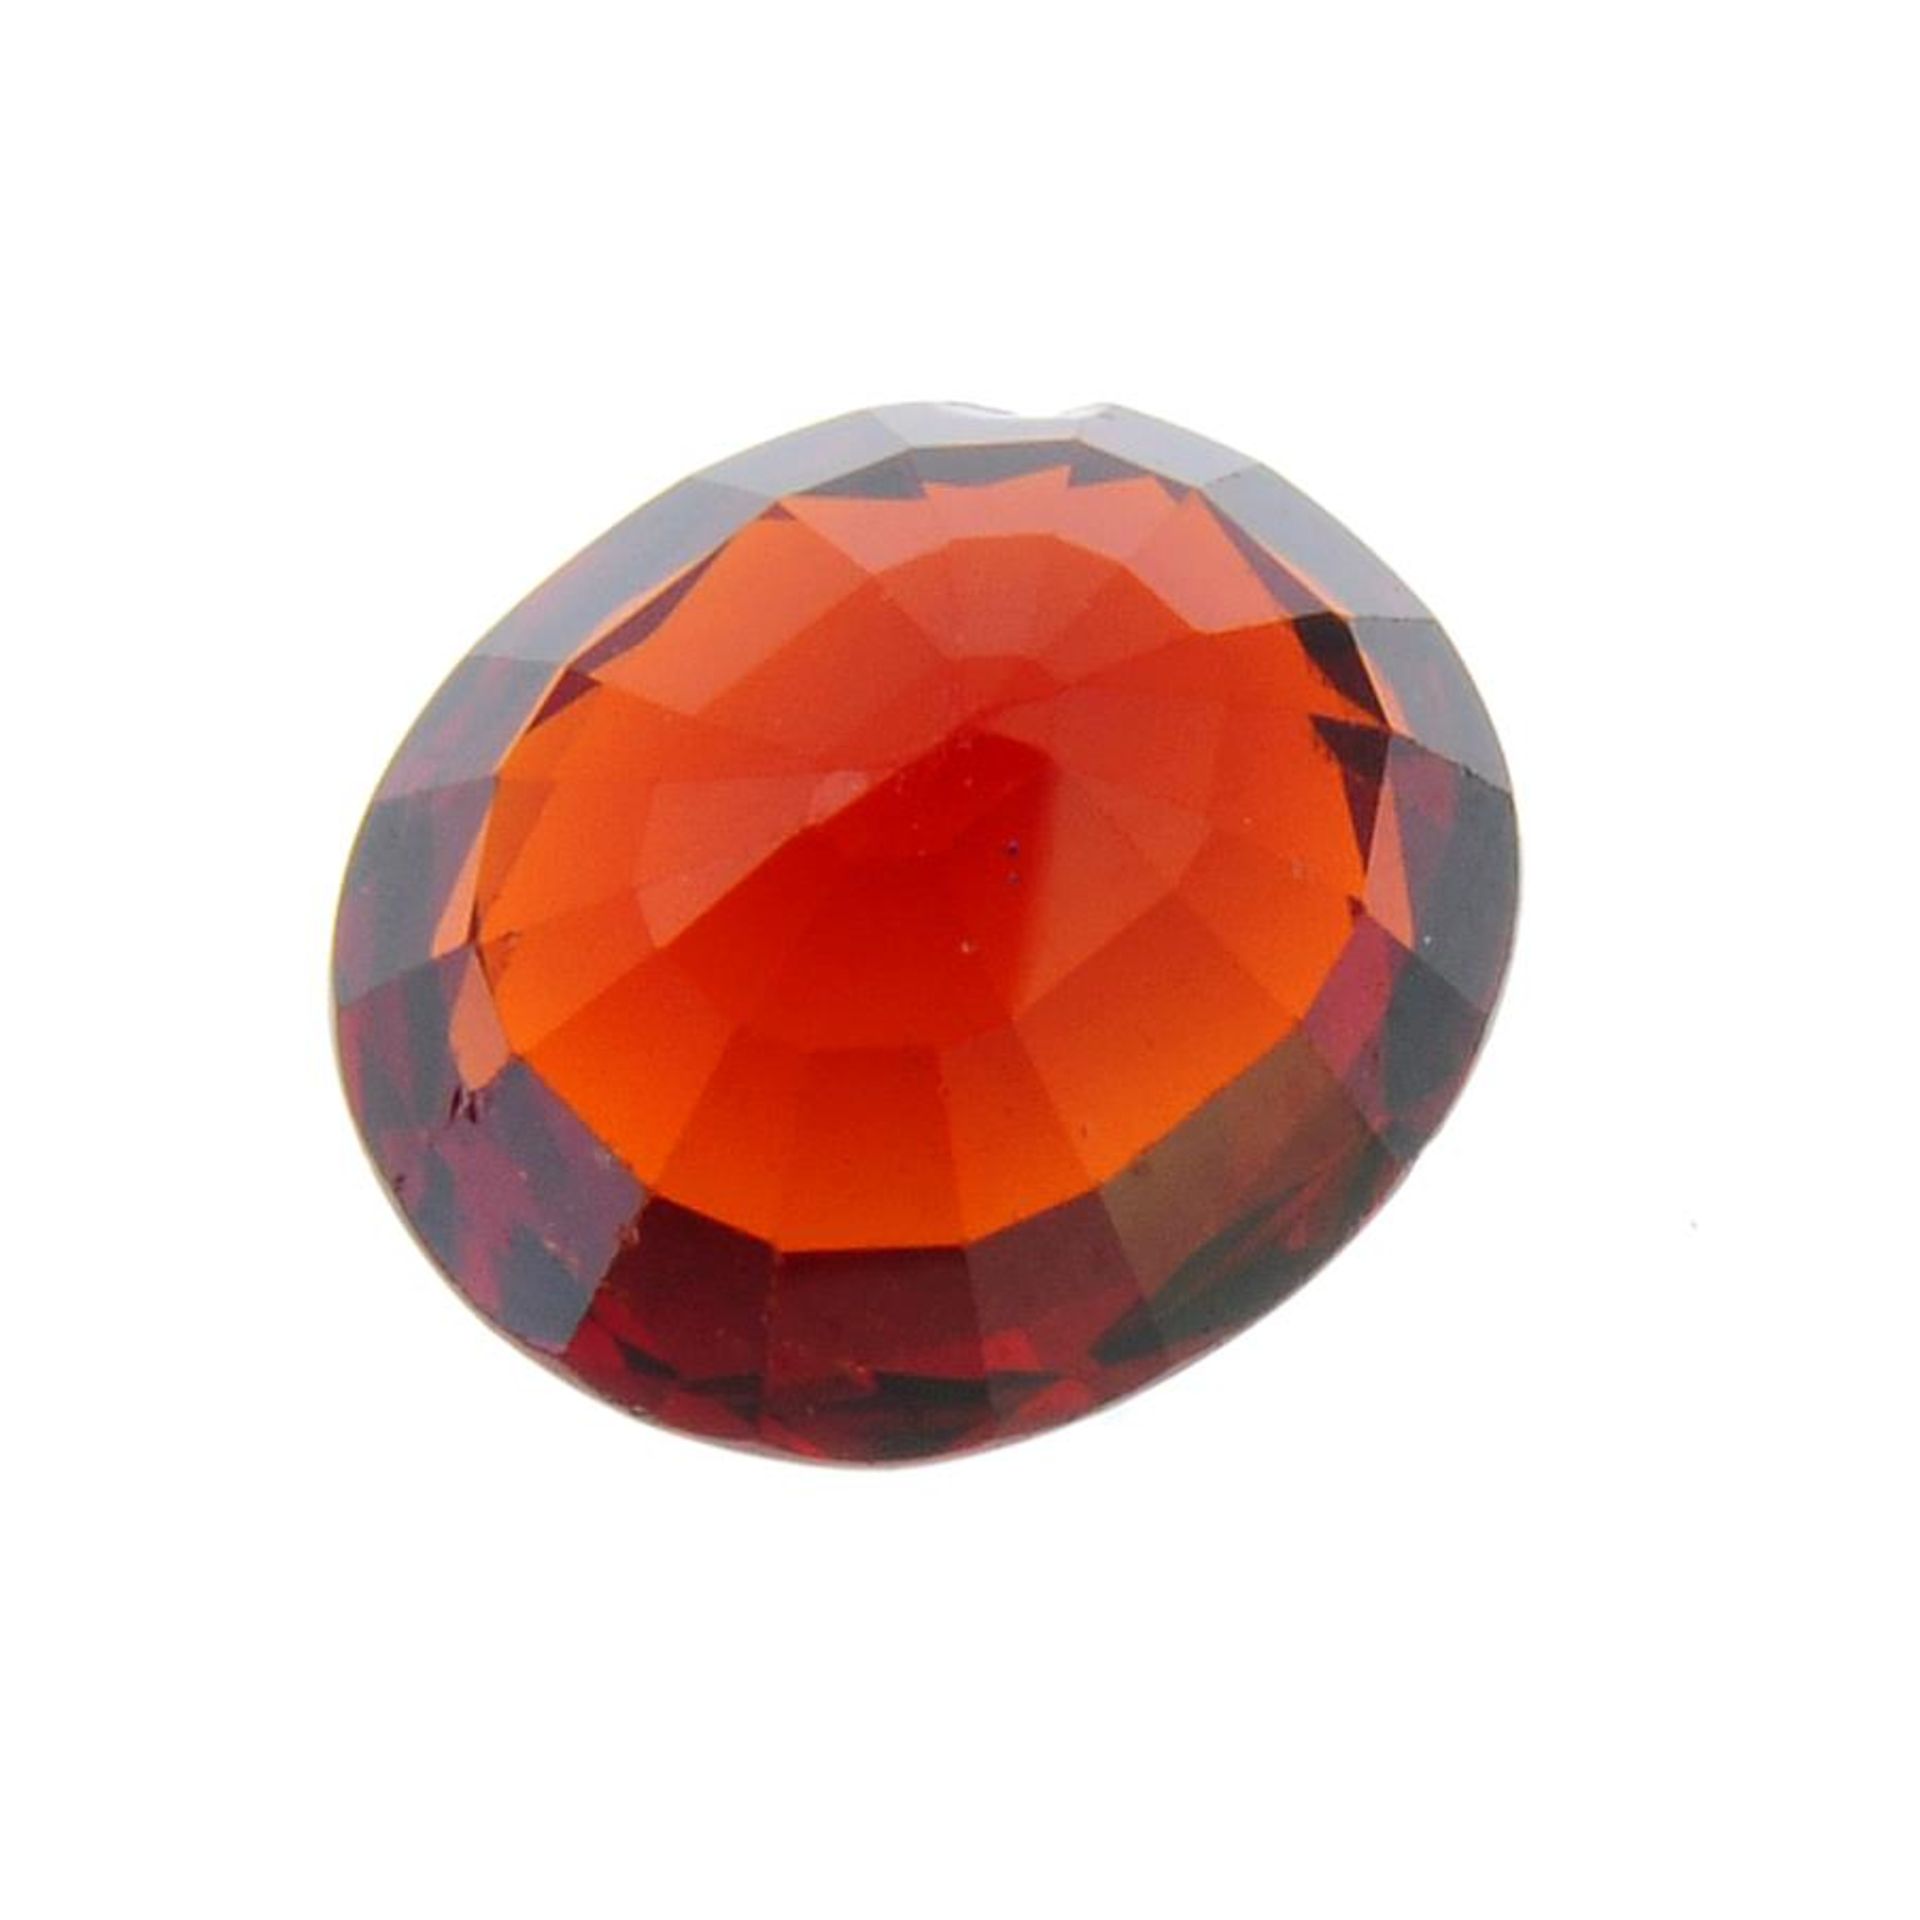 A oval shape garnet weighing 5.99ct measuring 11.25 by 9.95 by 5.9mm. - Image 2 of 2